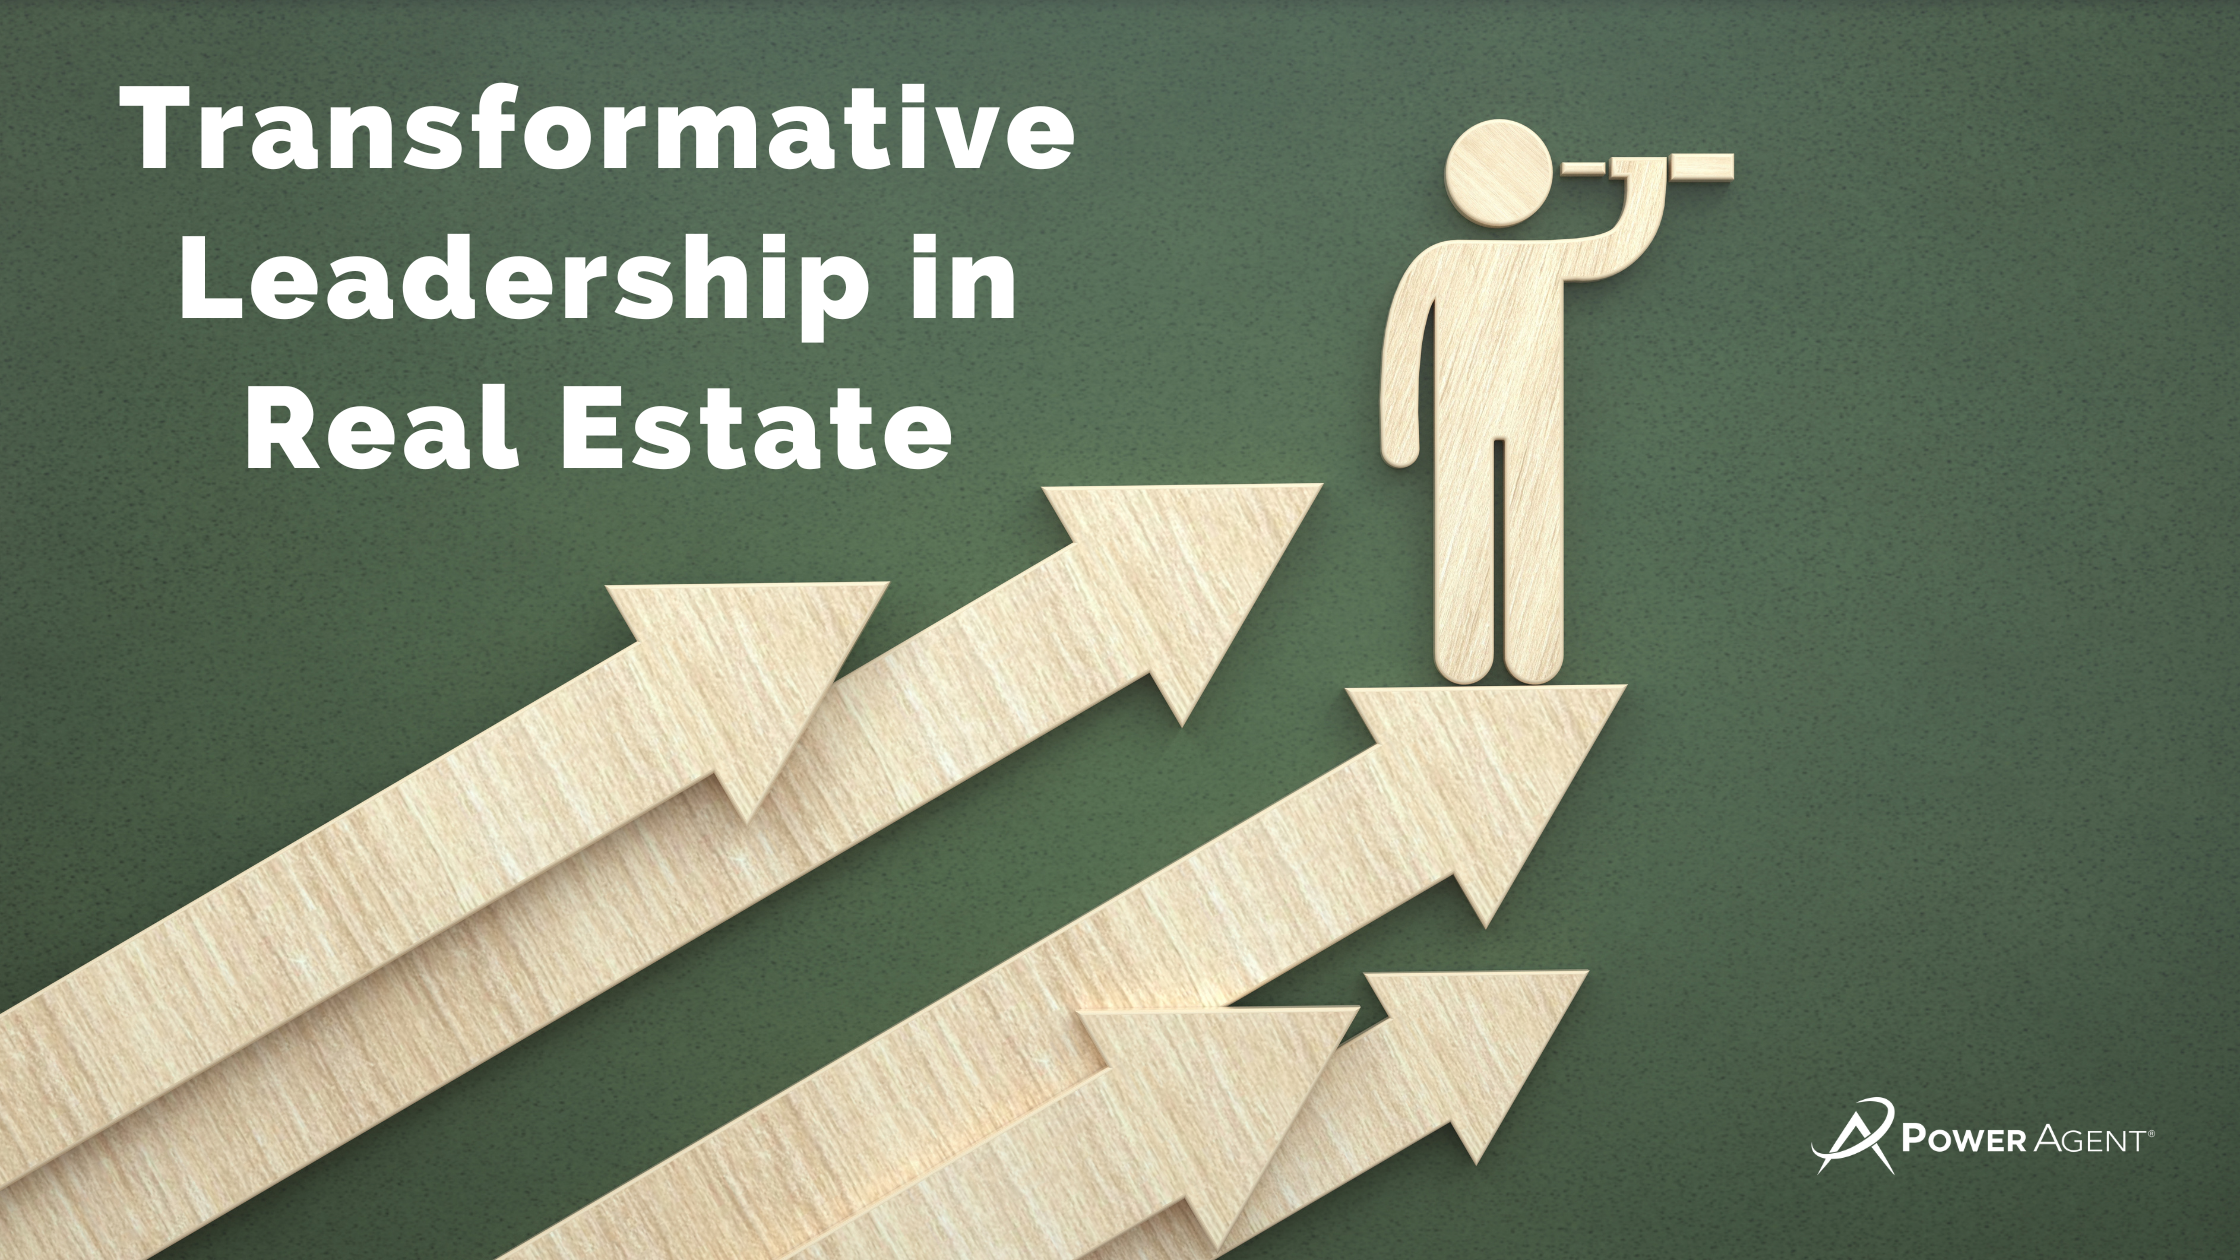 Transformative Real Estate Leadership in Times of Crisis